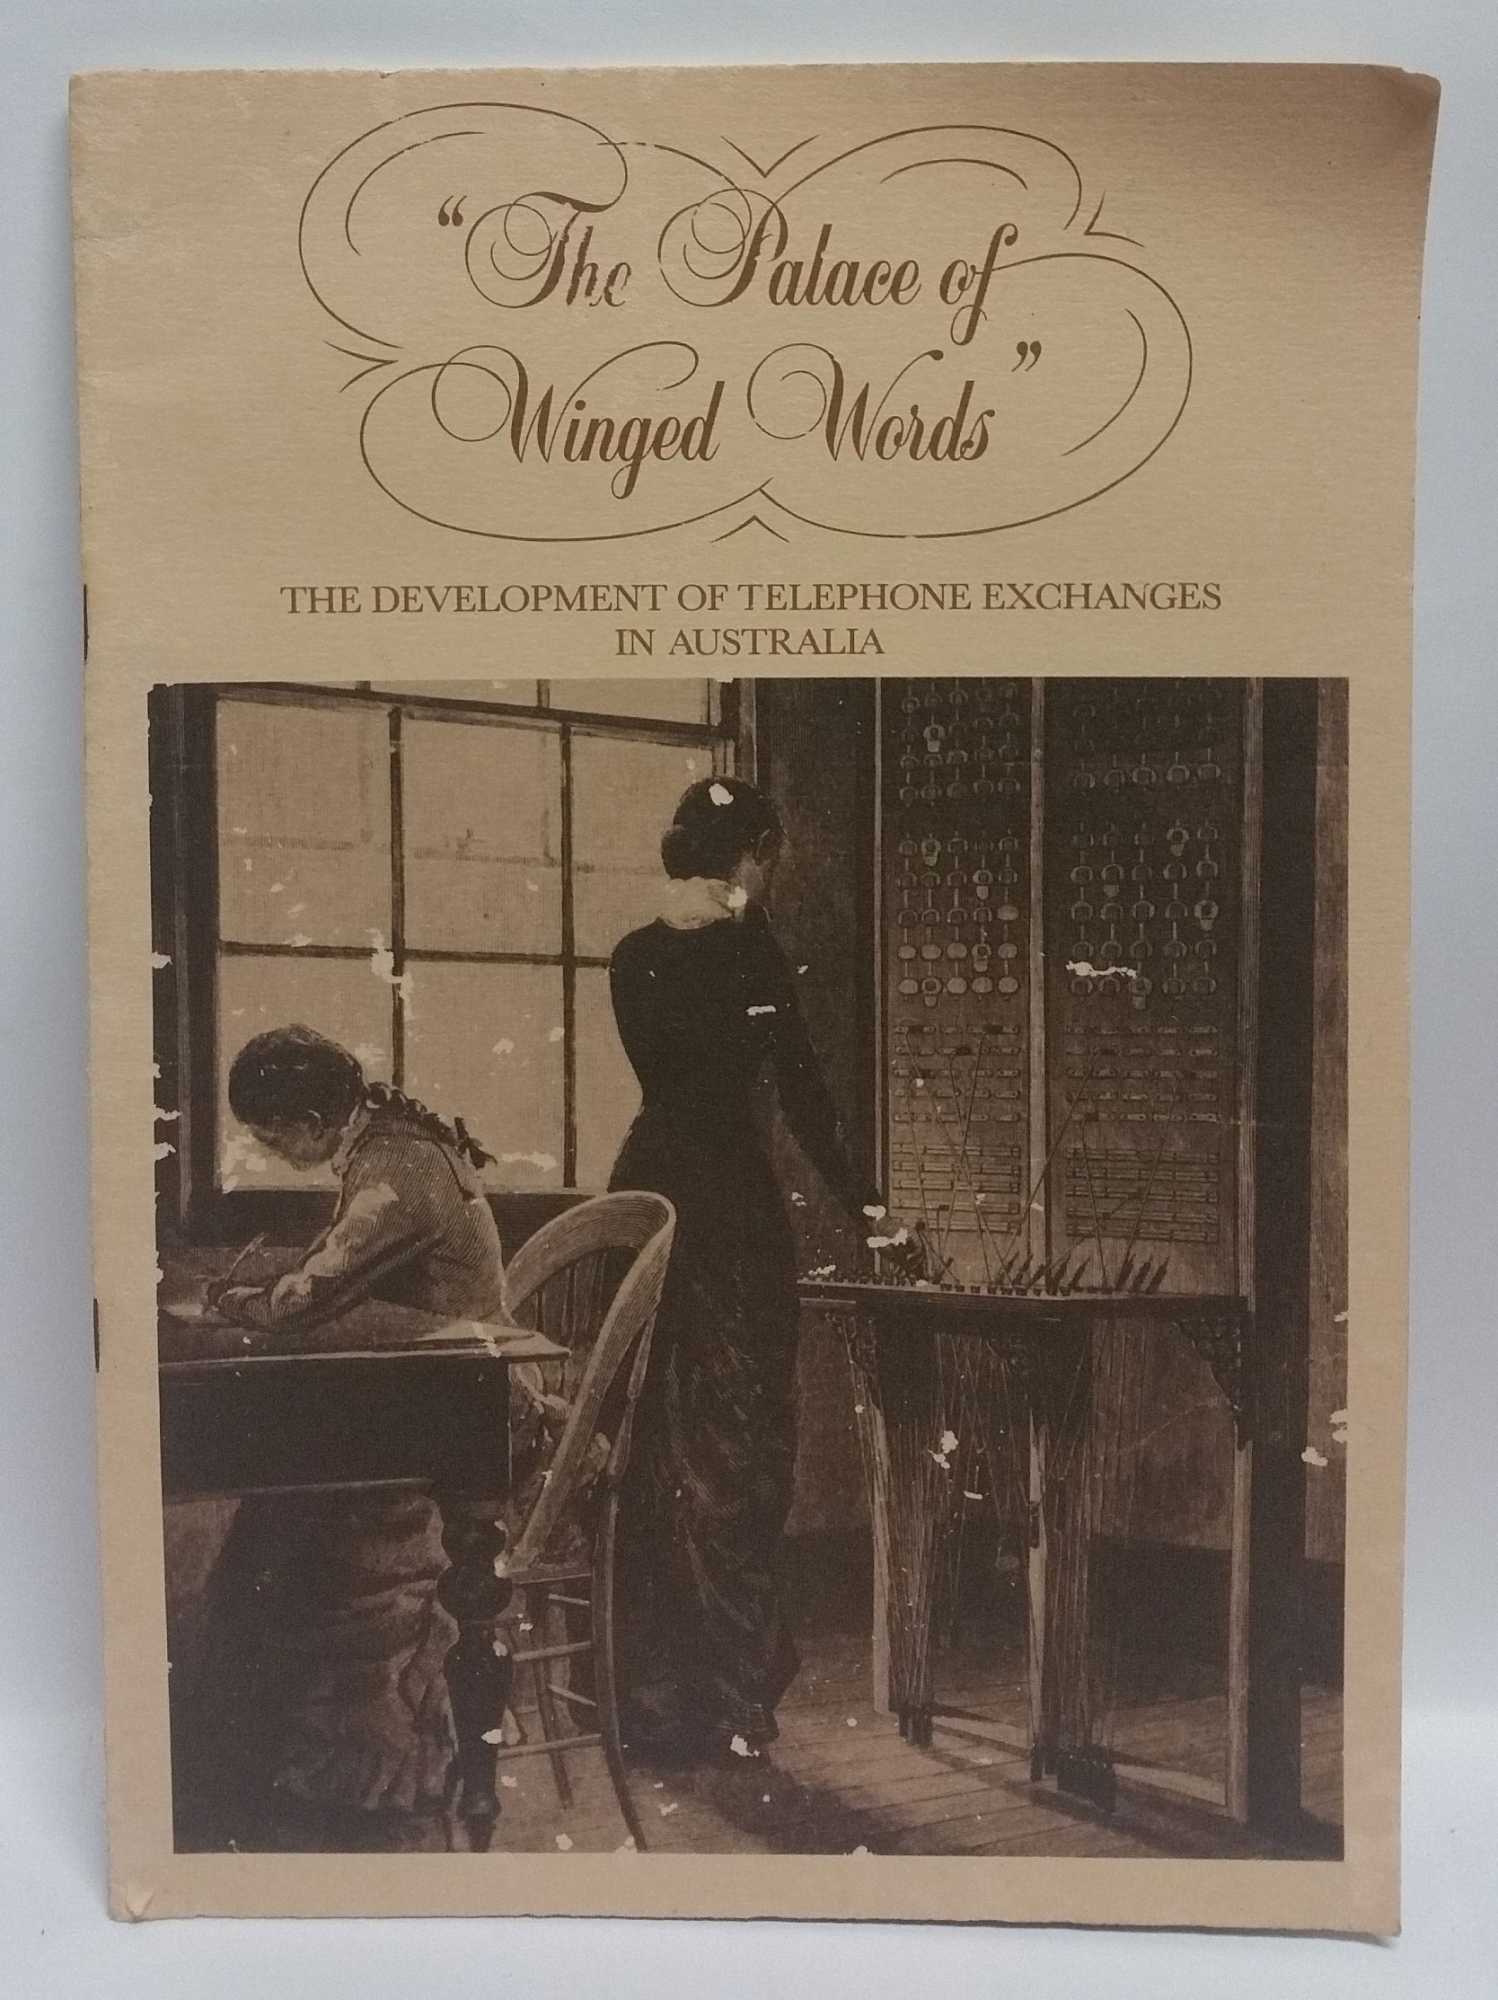 Telecom Australia - The Palace of Winged Words: The Development of Telephone Exchanges in Australia